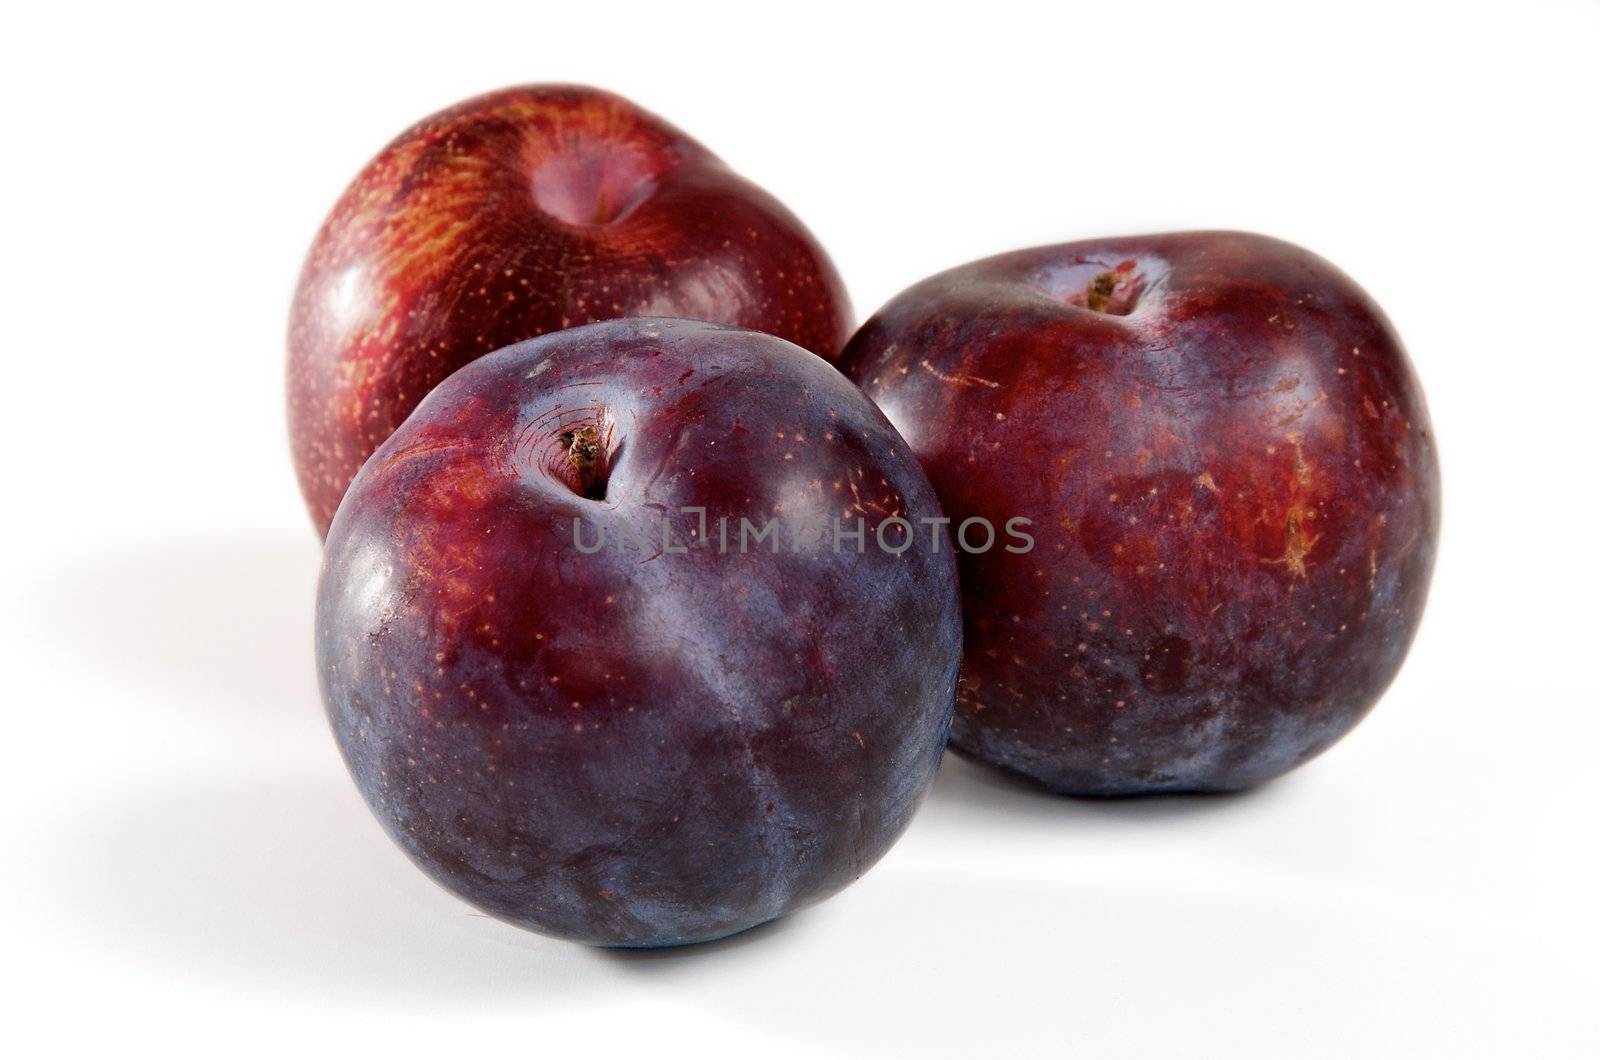 Three red plums on a white background.